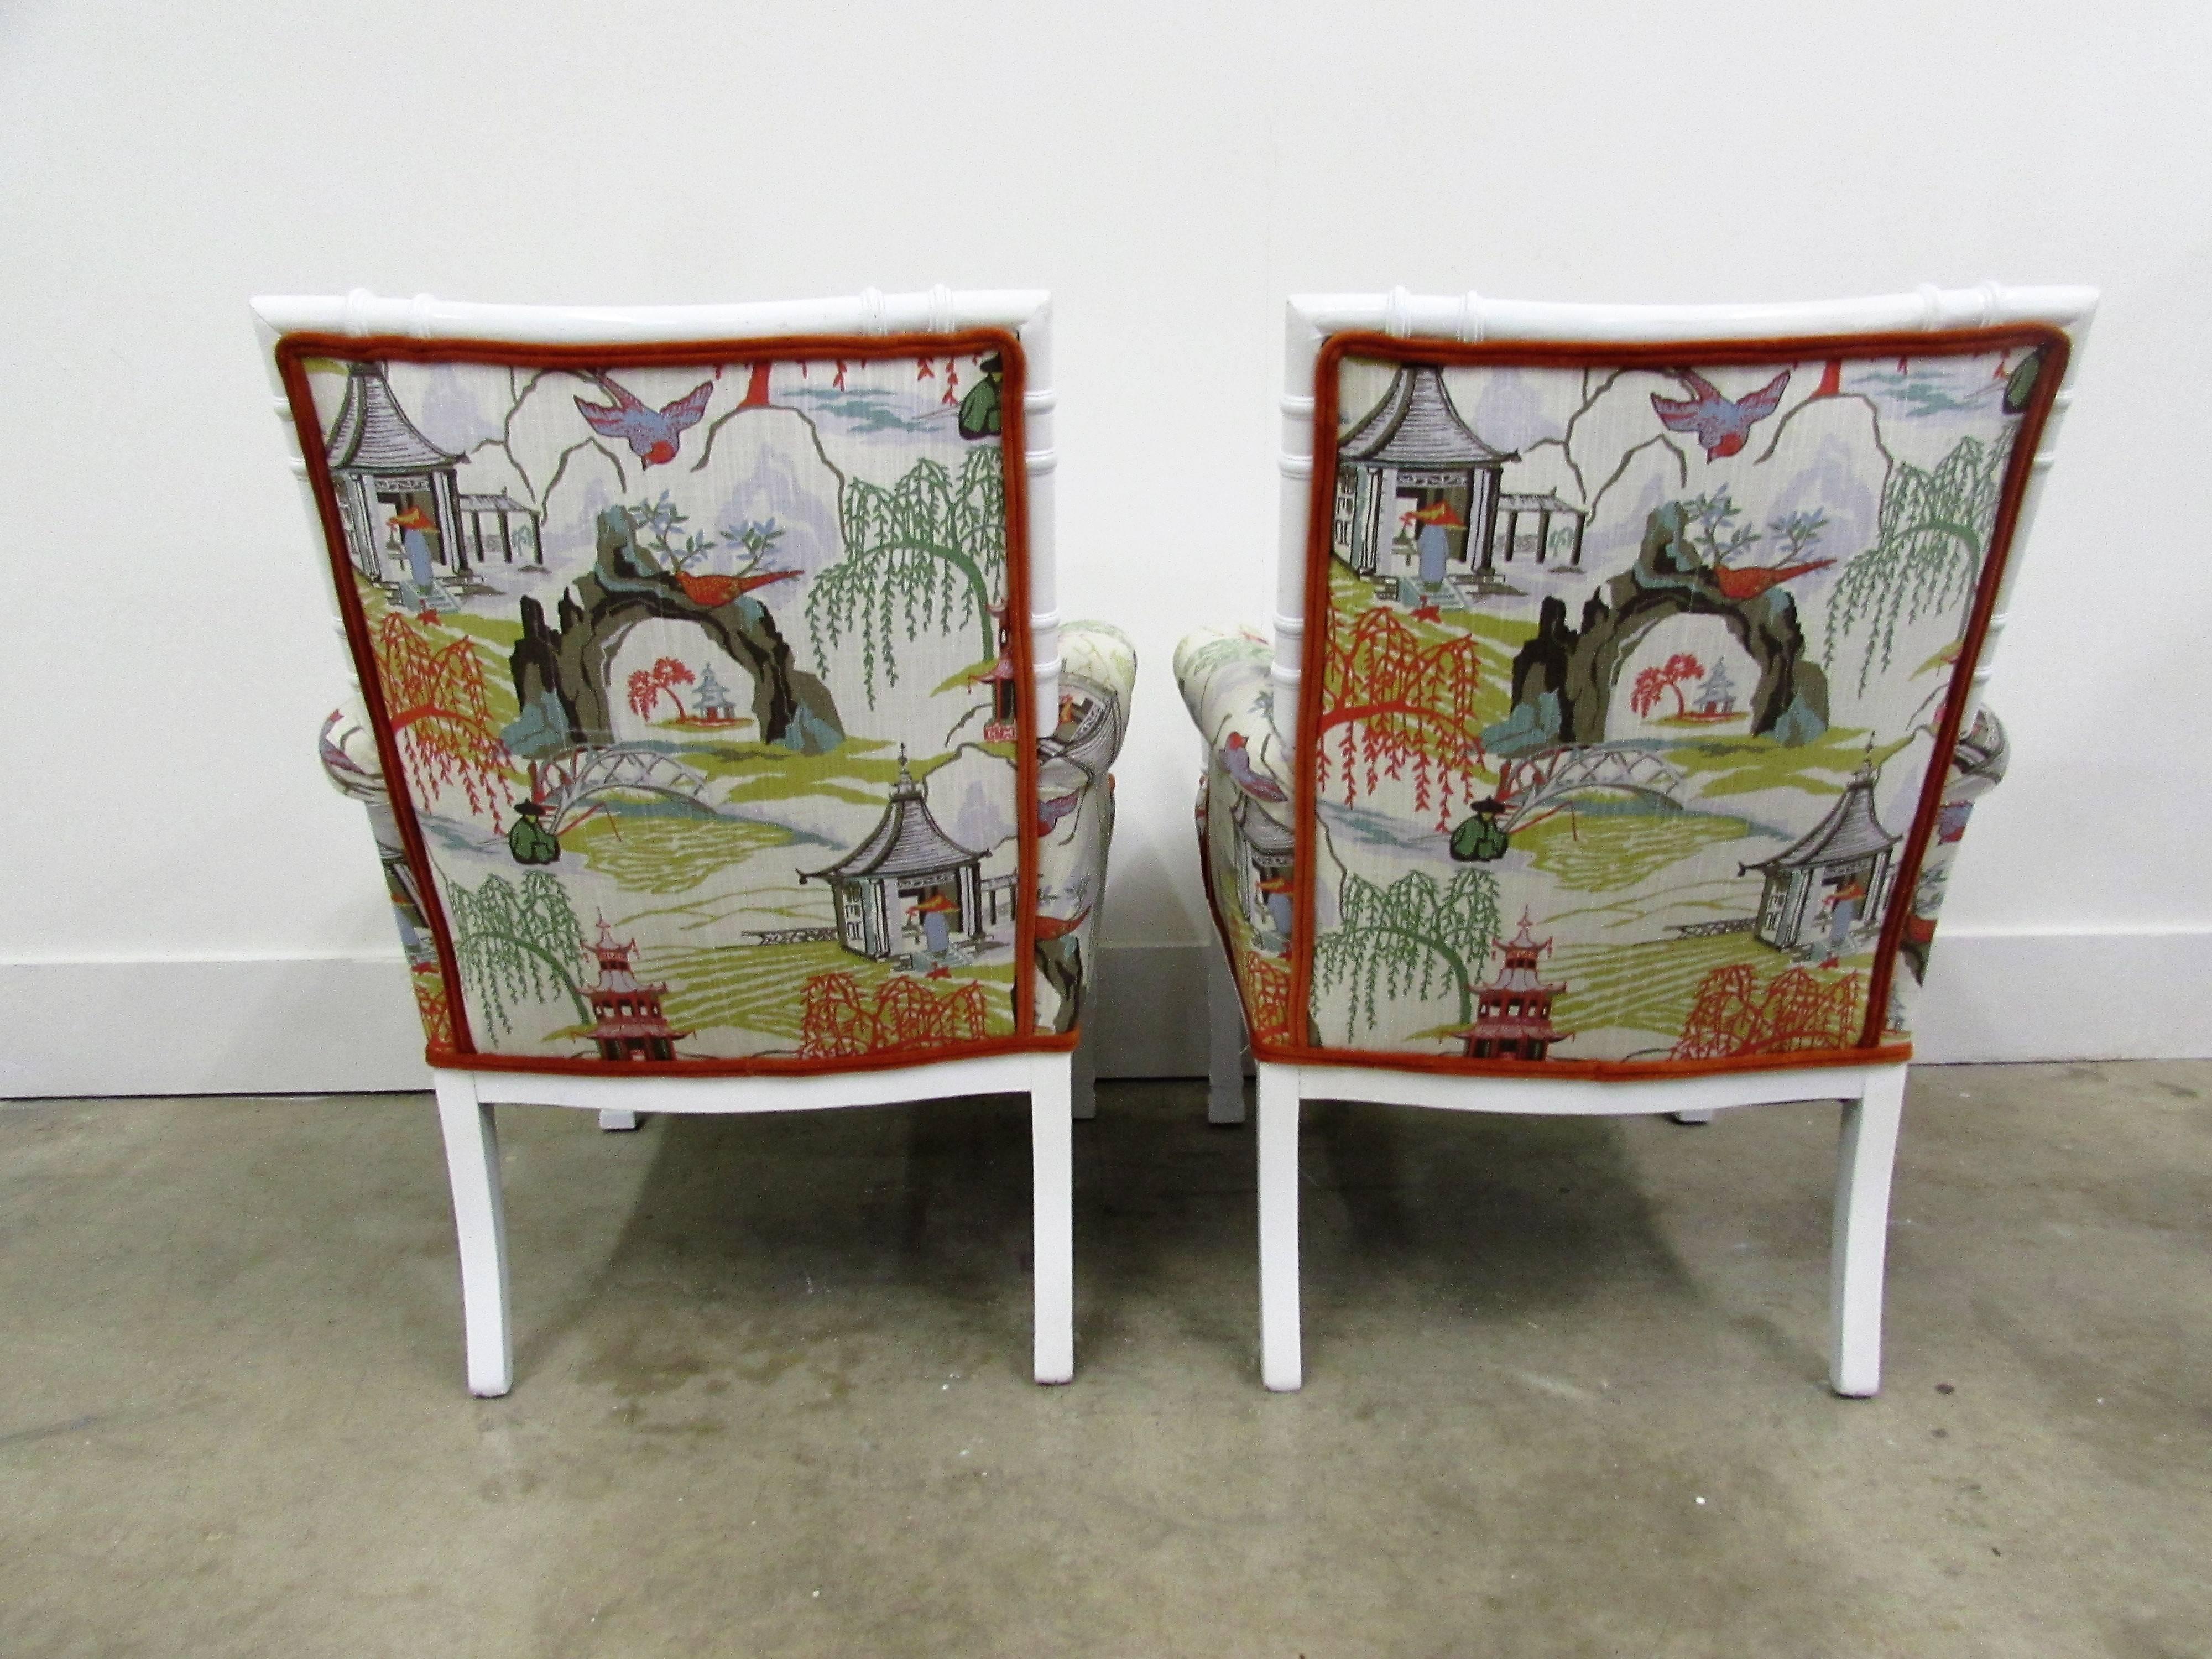 Pair of vintage chinoiserie and faux bamboo armchairs adorned in Robert Allen Toile Fabric with mohair coral piping and customized by The Lacquer Studio in white high gloss finish.
Measure: Seat height 18.5